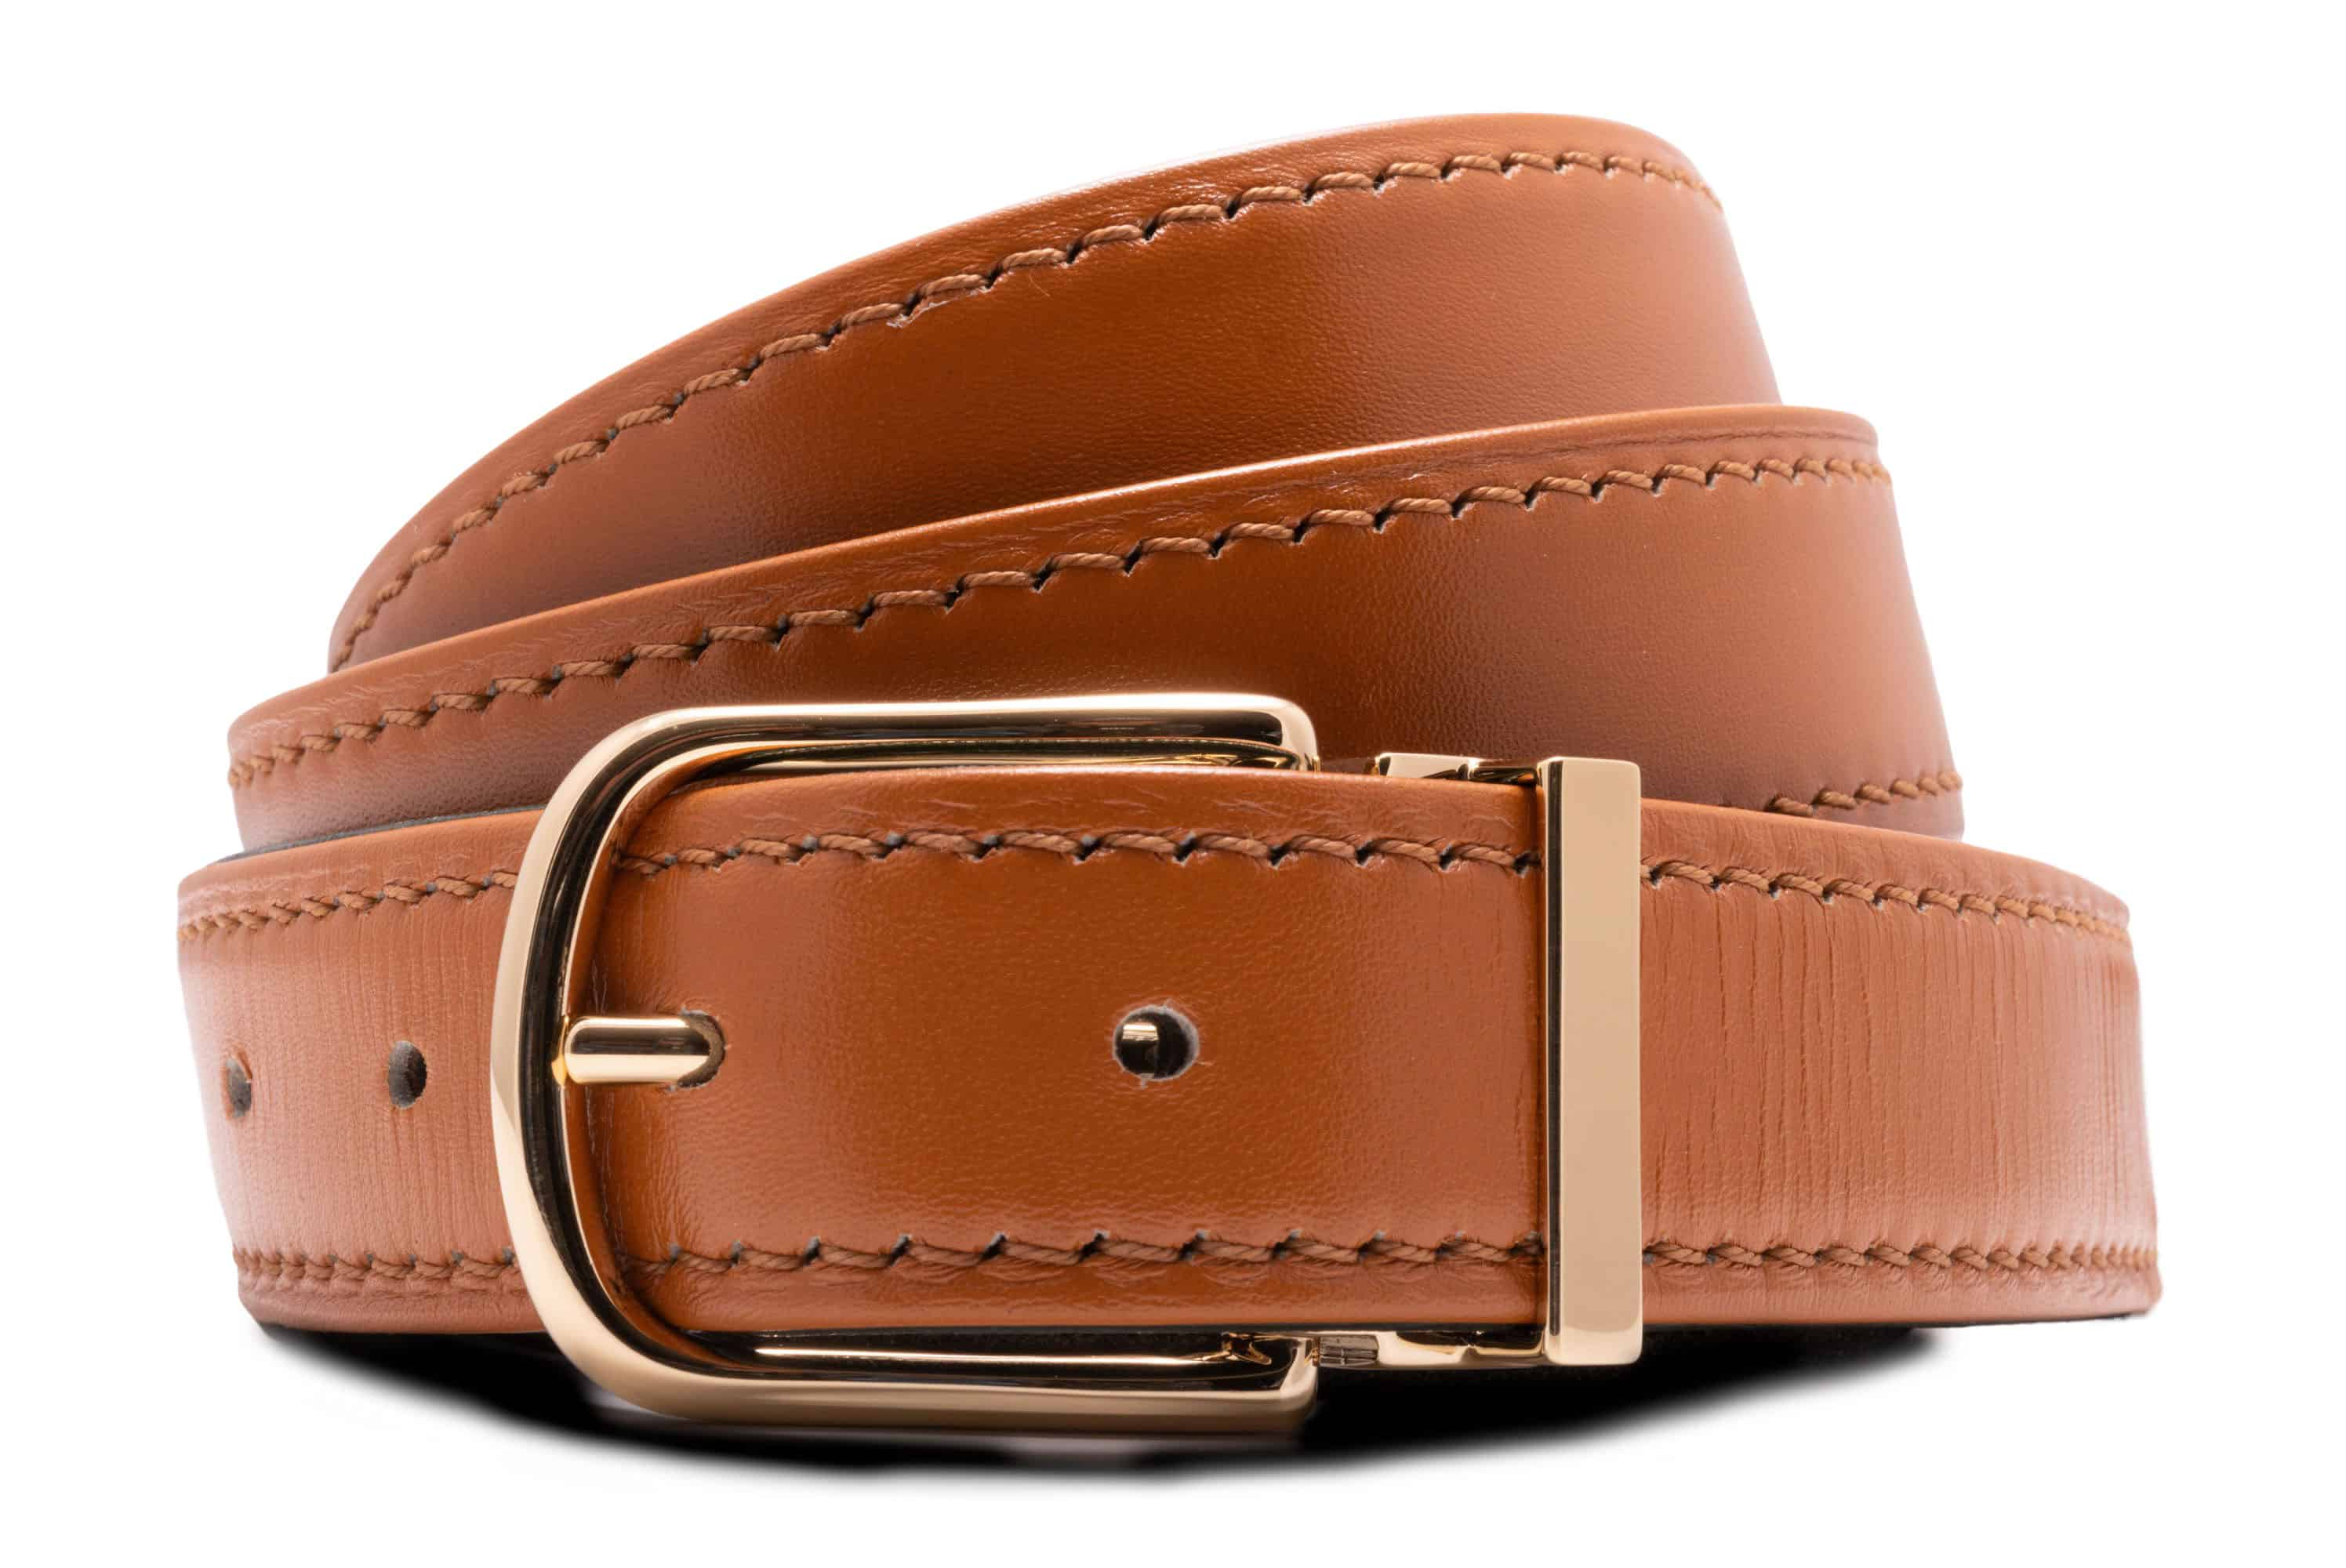 Tan Cognac Brown Calf Leather Belt Aniline Dyed Cut-To-Size - Folded Edges  3cm x 120cm - Fort Belvedere